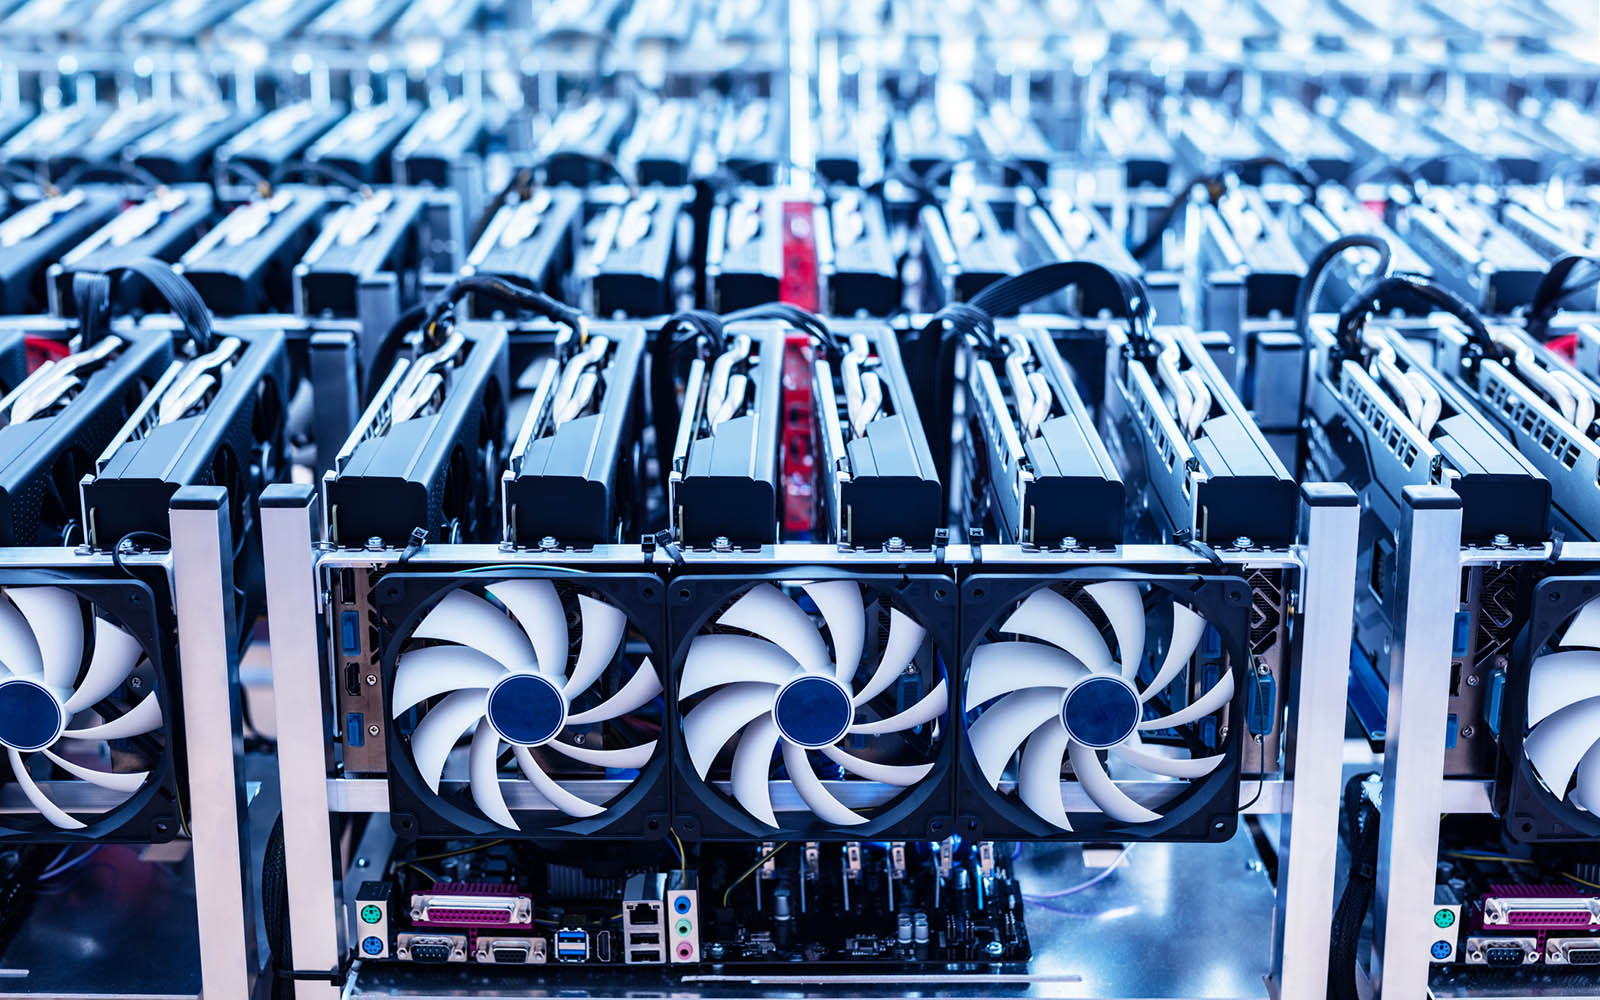 Crypto miners succumb to pressure to cut energy use